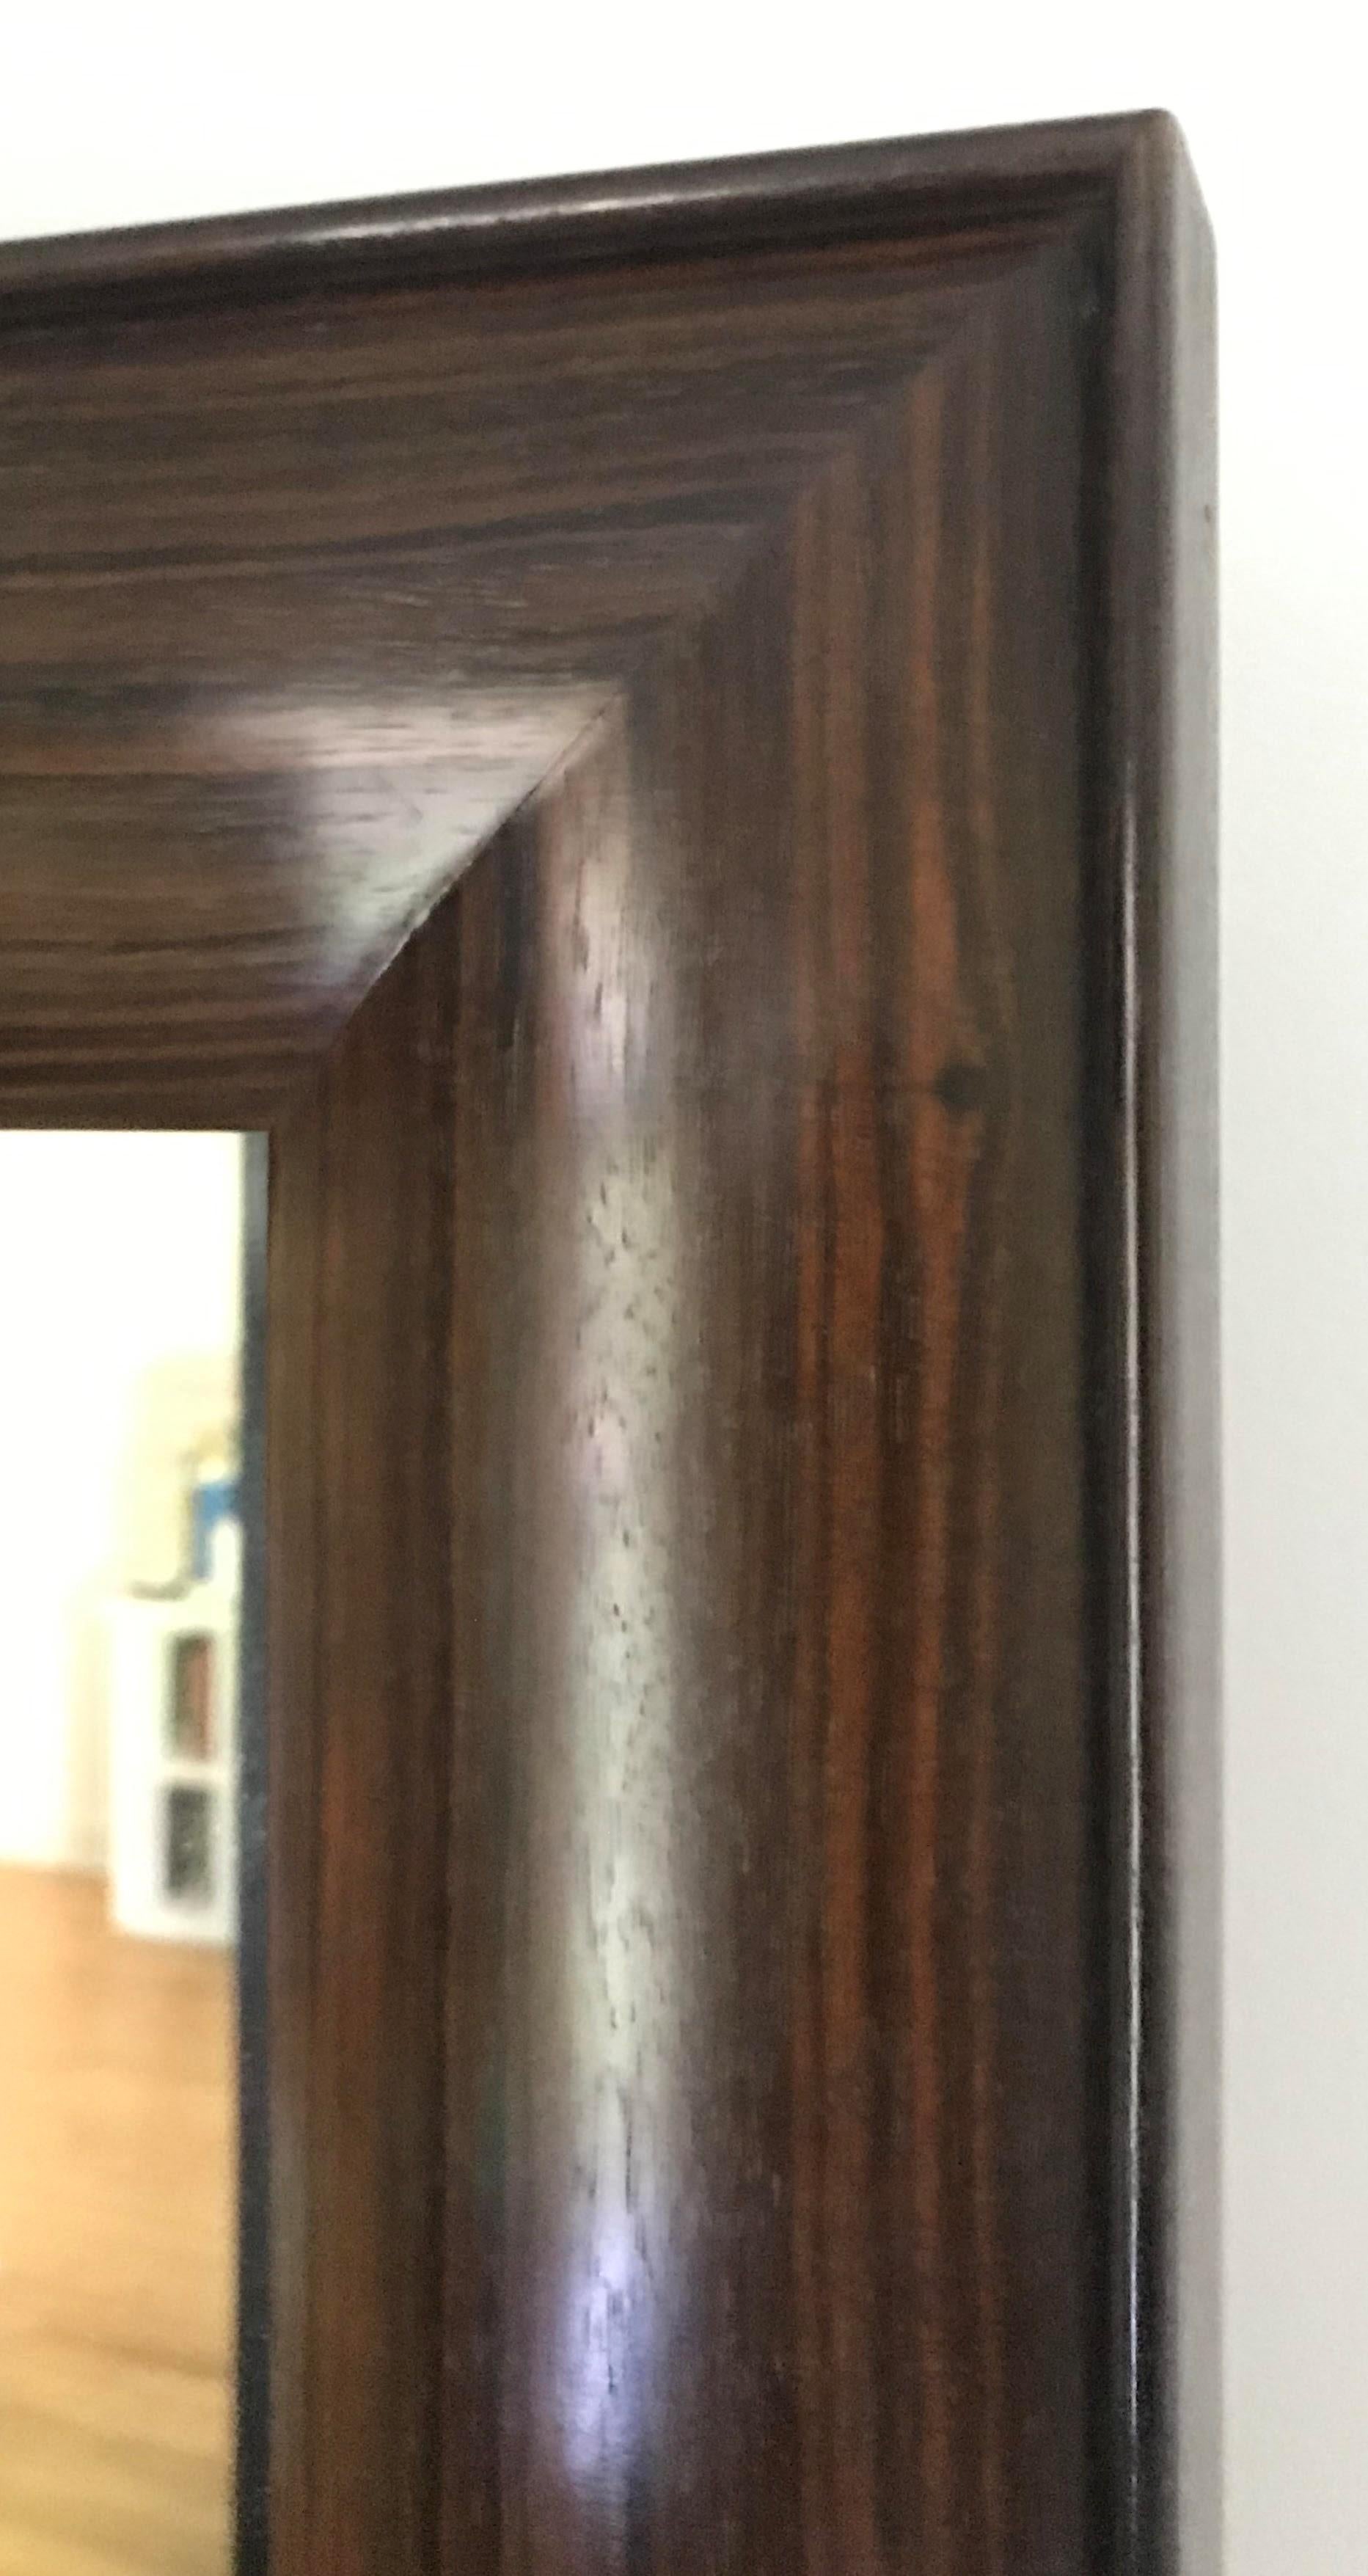 

One floor sample as shown in Macassar Ebony. Available Now for the Holidays! 25% off. 

Full length dressing mirror in Macassar Ebony. Customizable in any exotic wood.
A wonderful compliment to the perfect master bedroom or dressing room. The